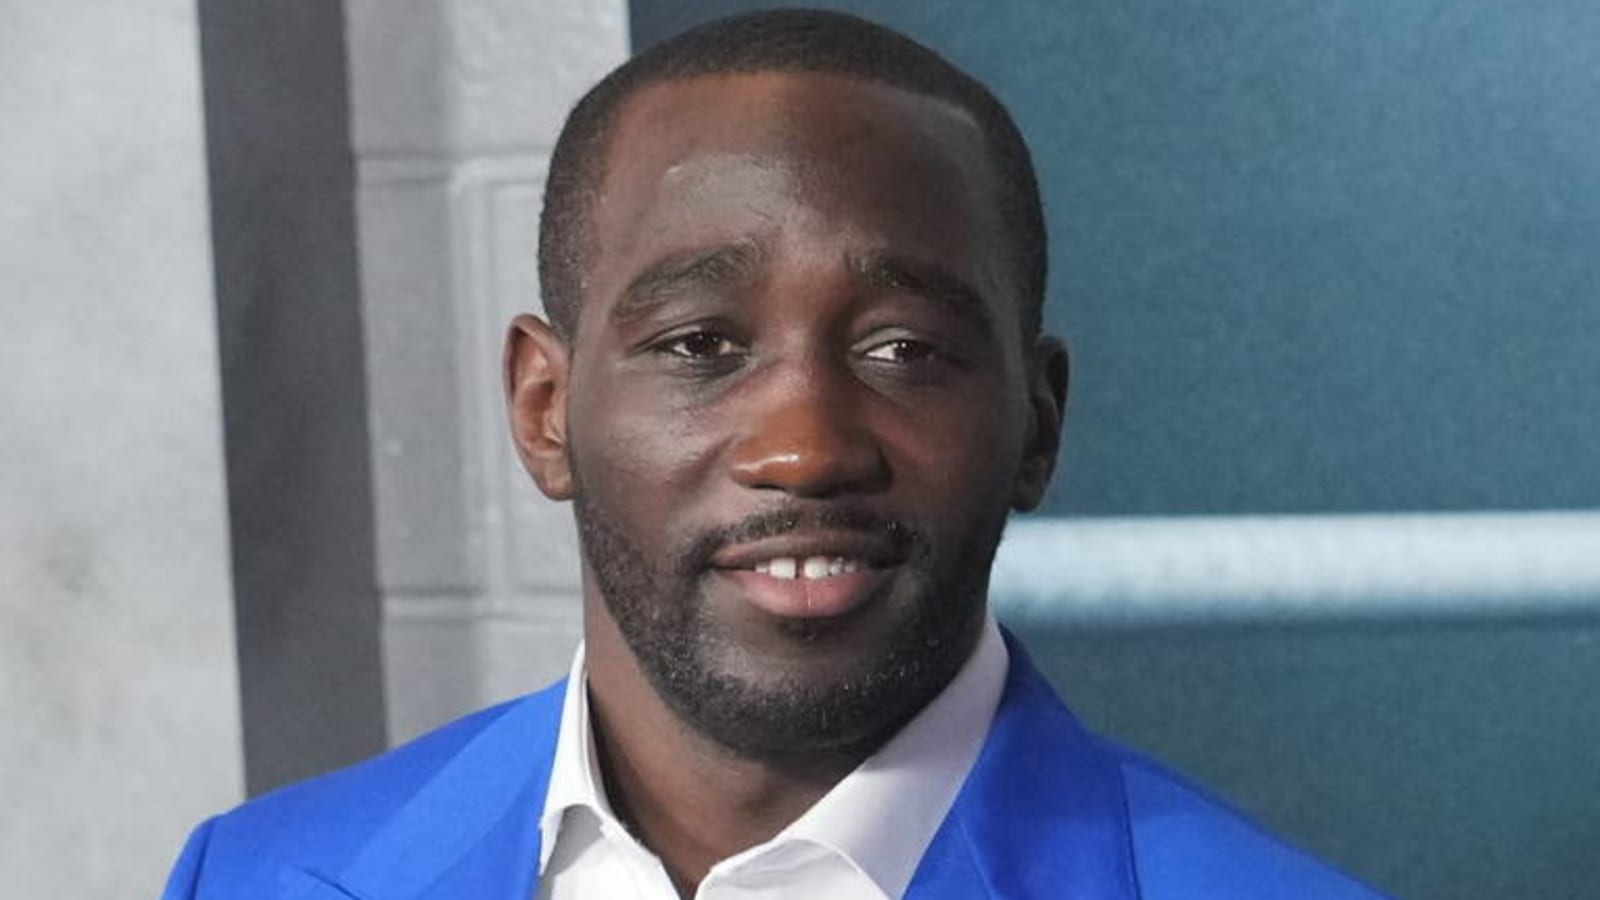 Terence Crawford Looks To Take Over 154 As He Did At 147